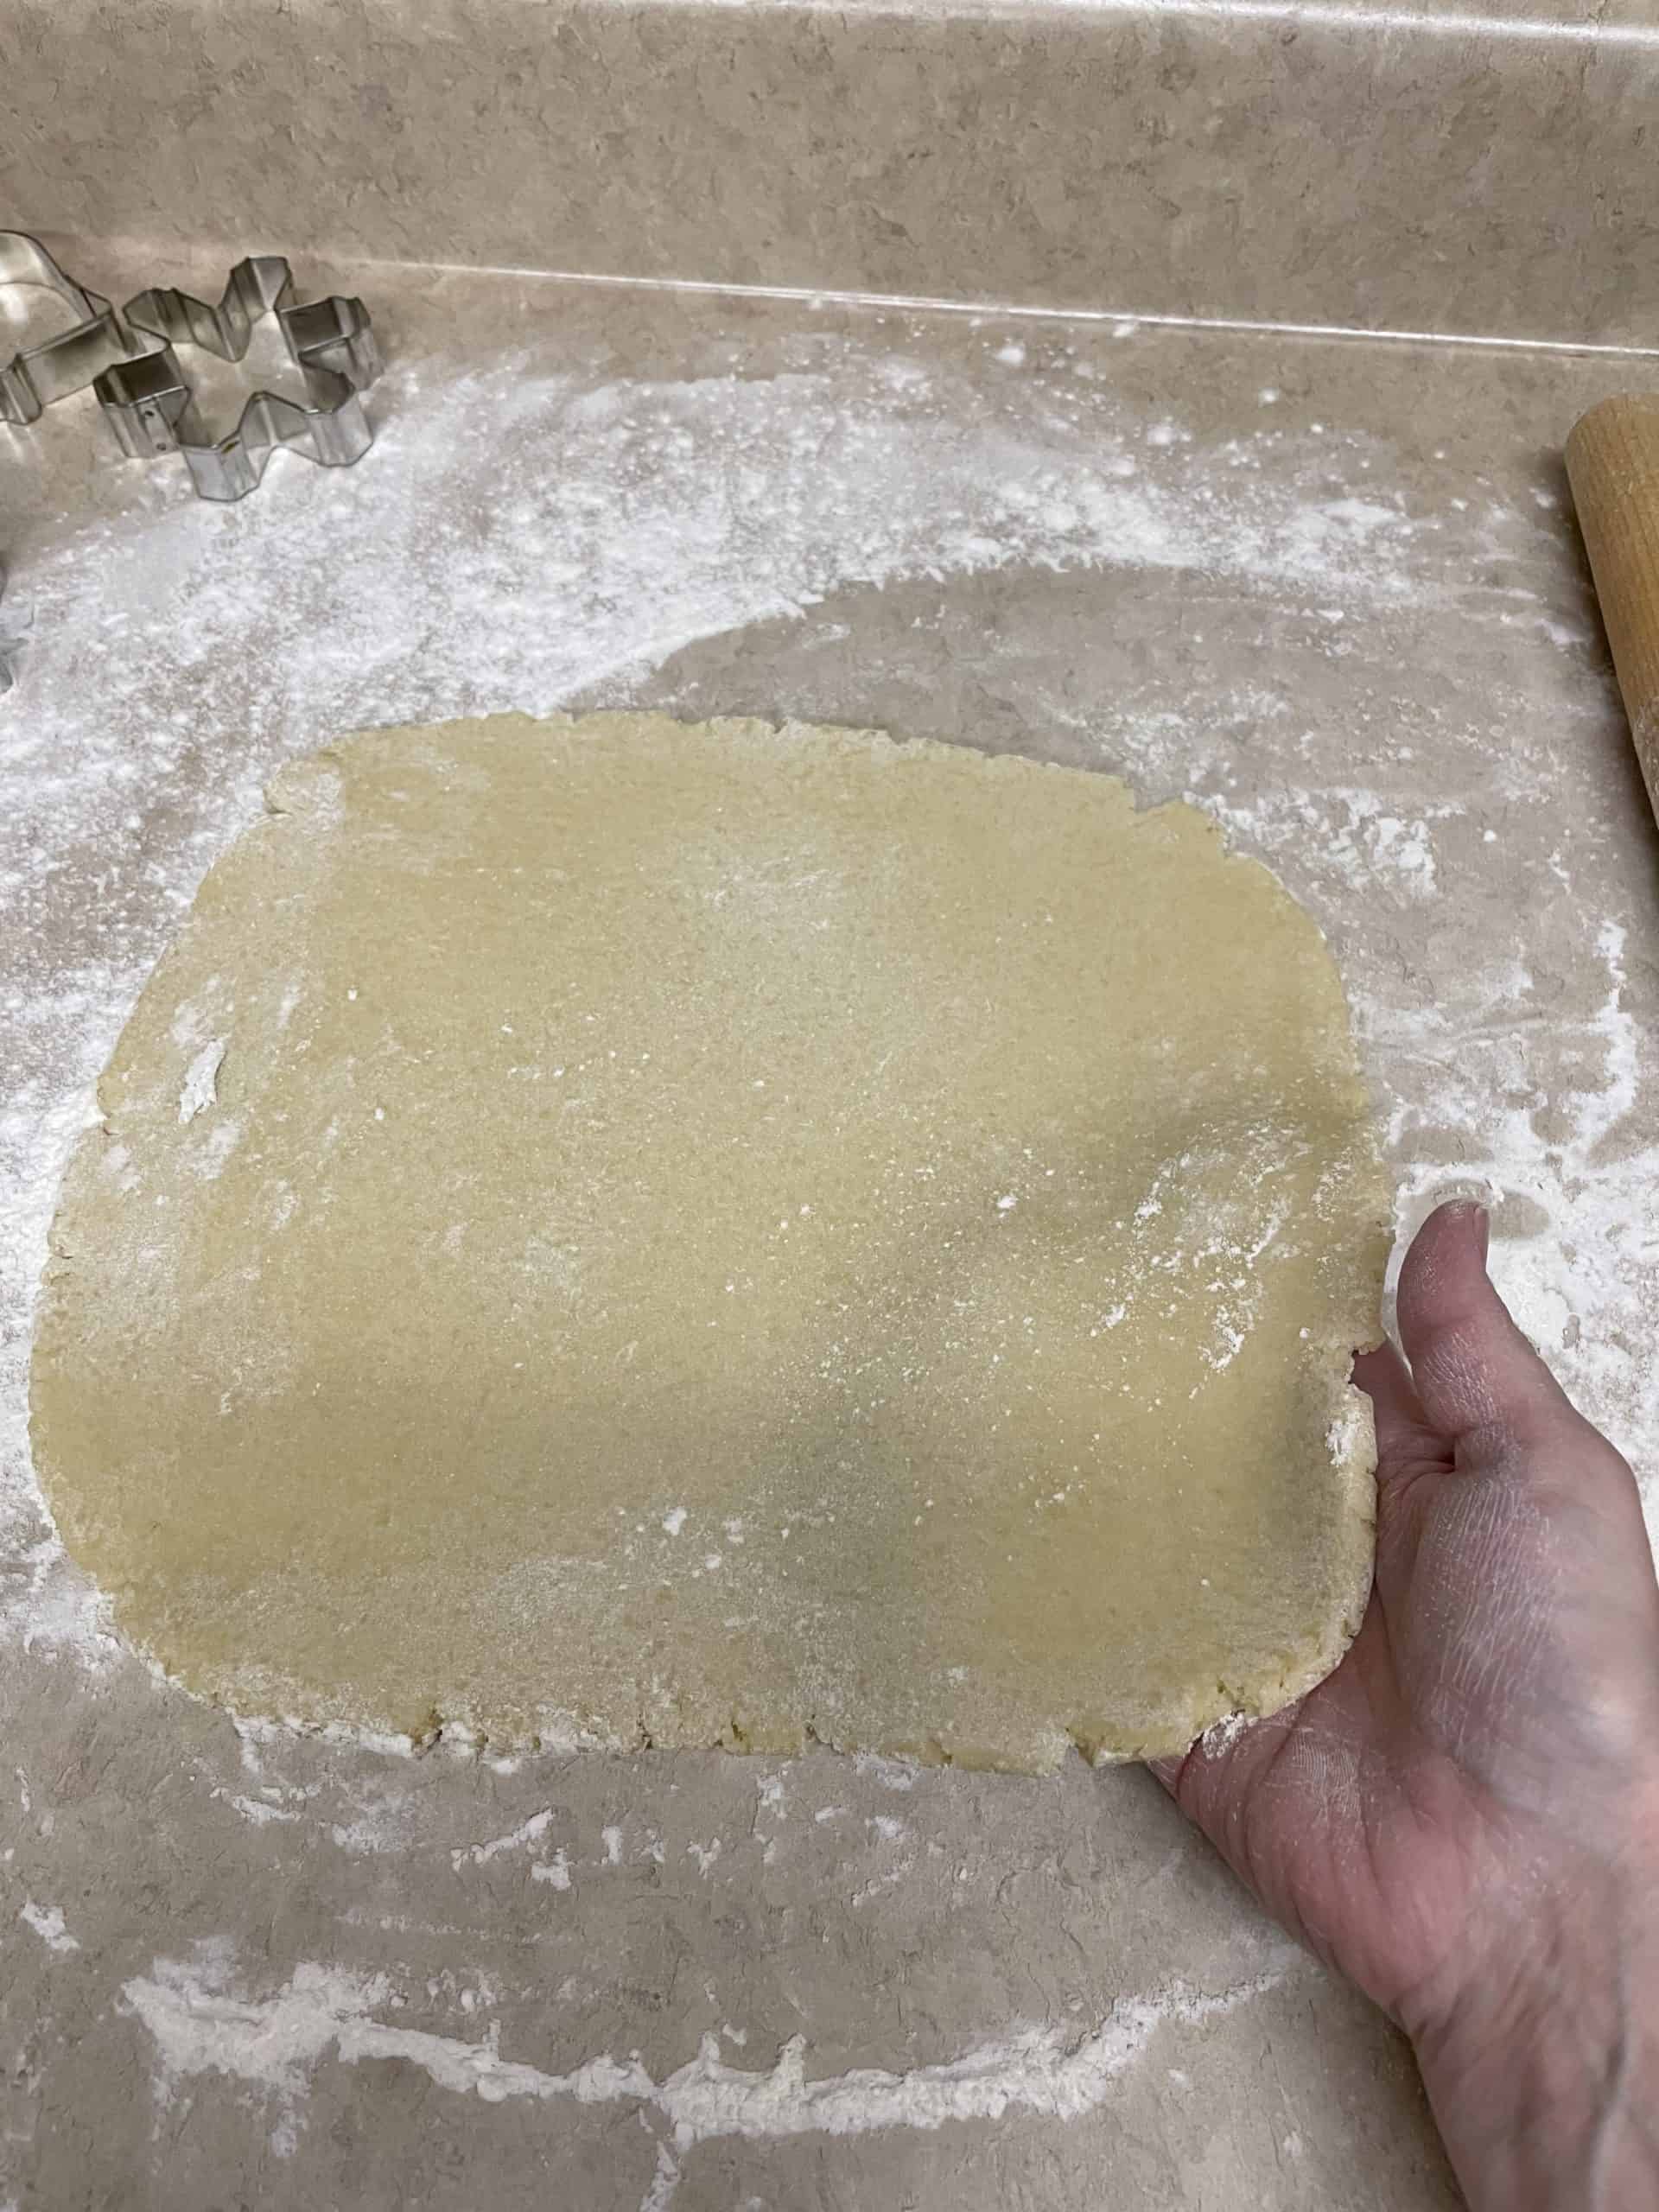 Make sure the sugar cookie dough is not sticking to the surface by placing your hand under the dough.